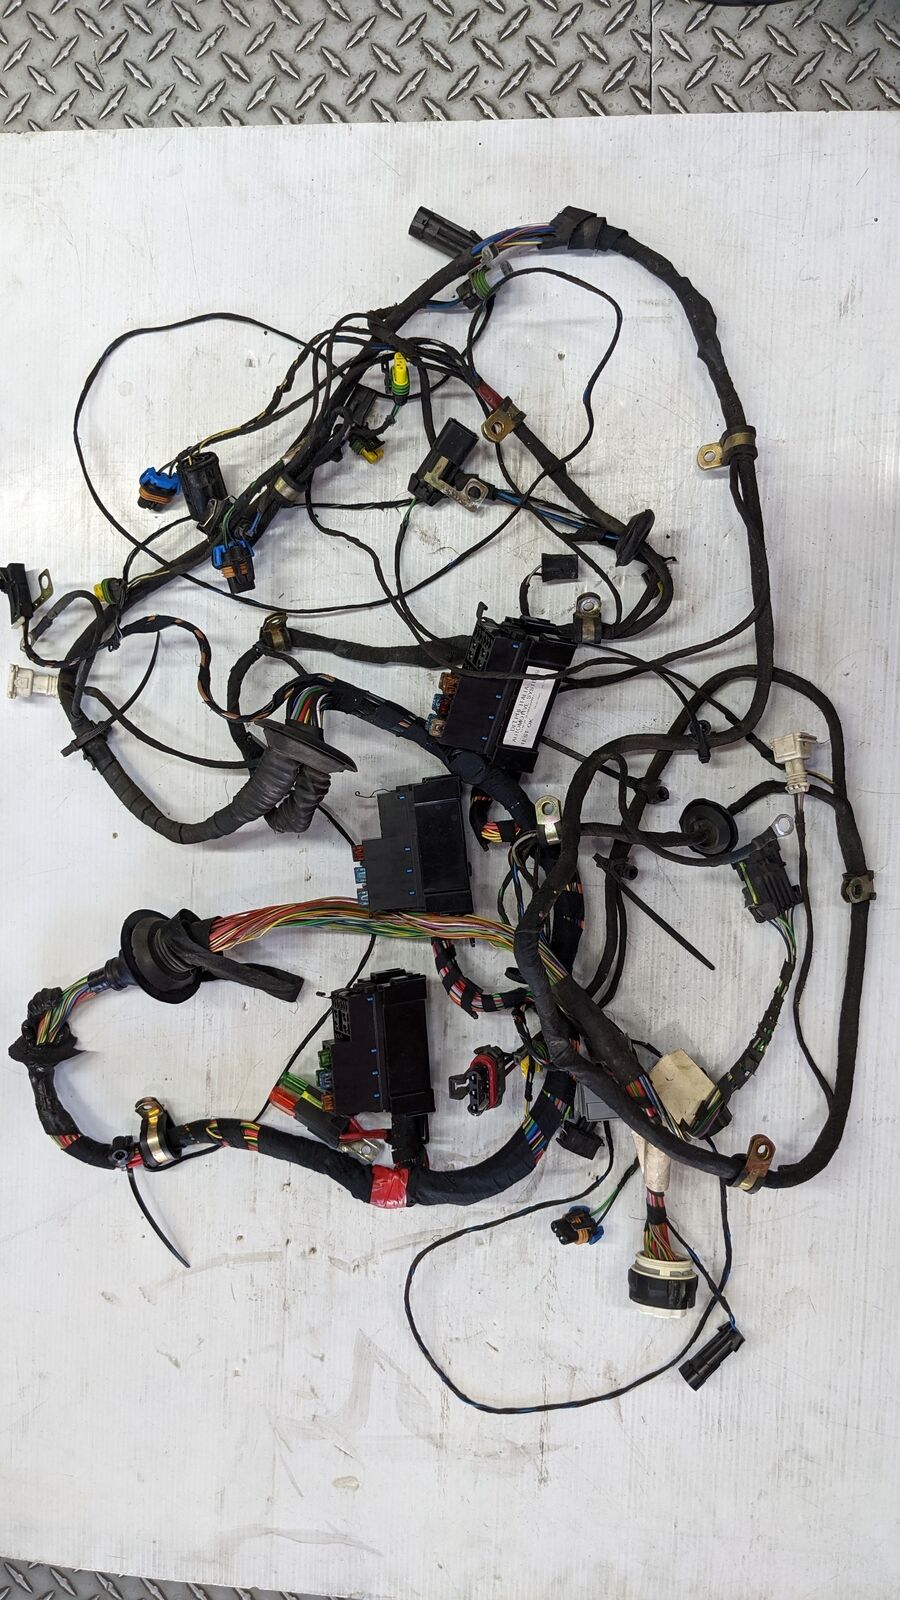 FERRARI 360 SPIDER PART, FRONT WIRING HARNESS WITH FUSE BOX 183347